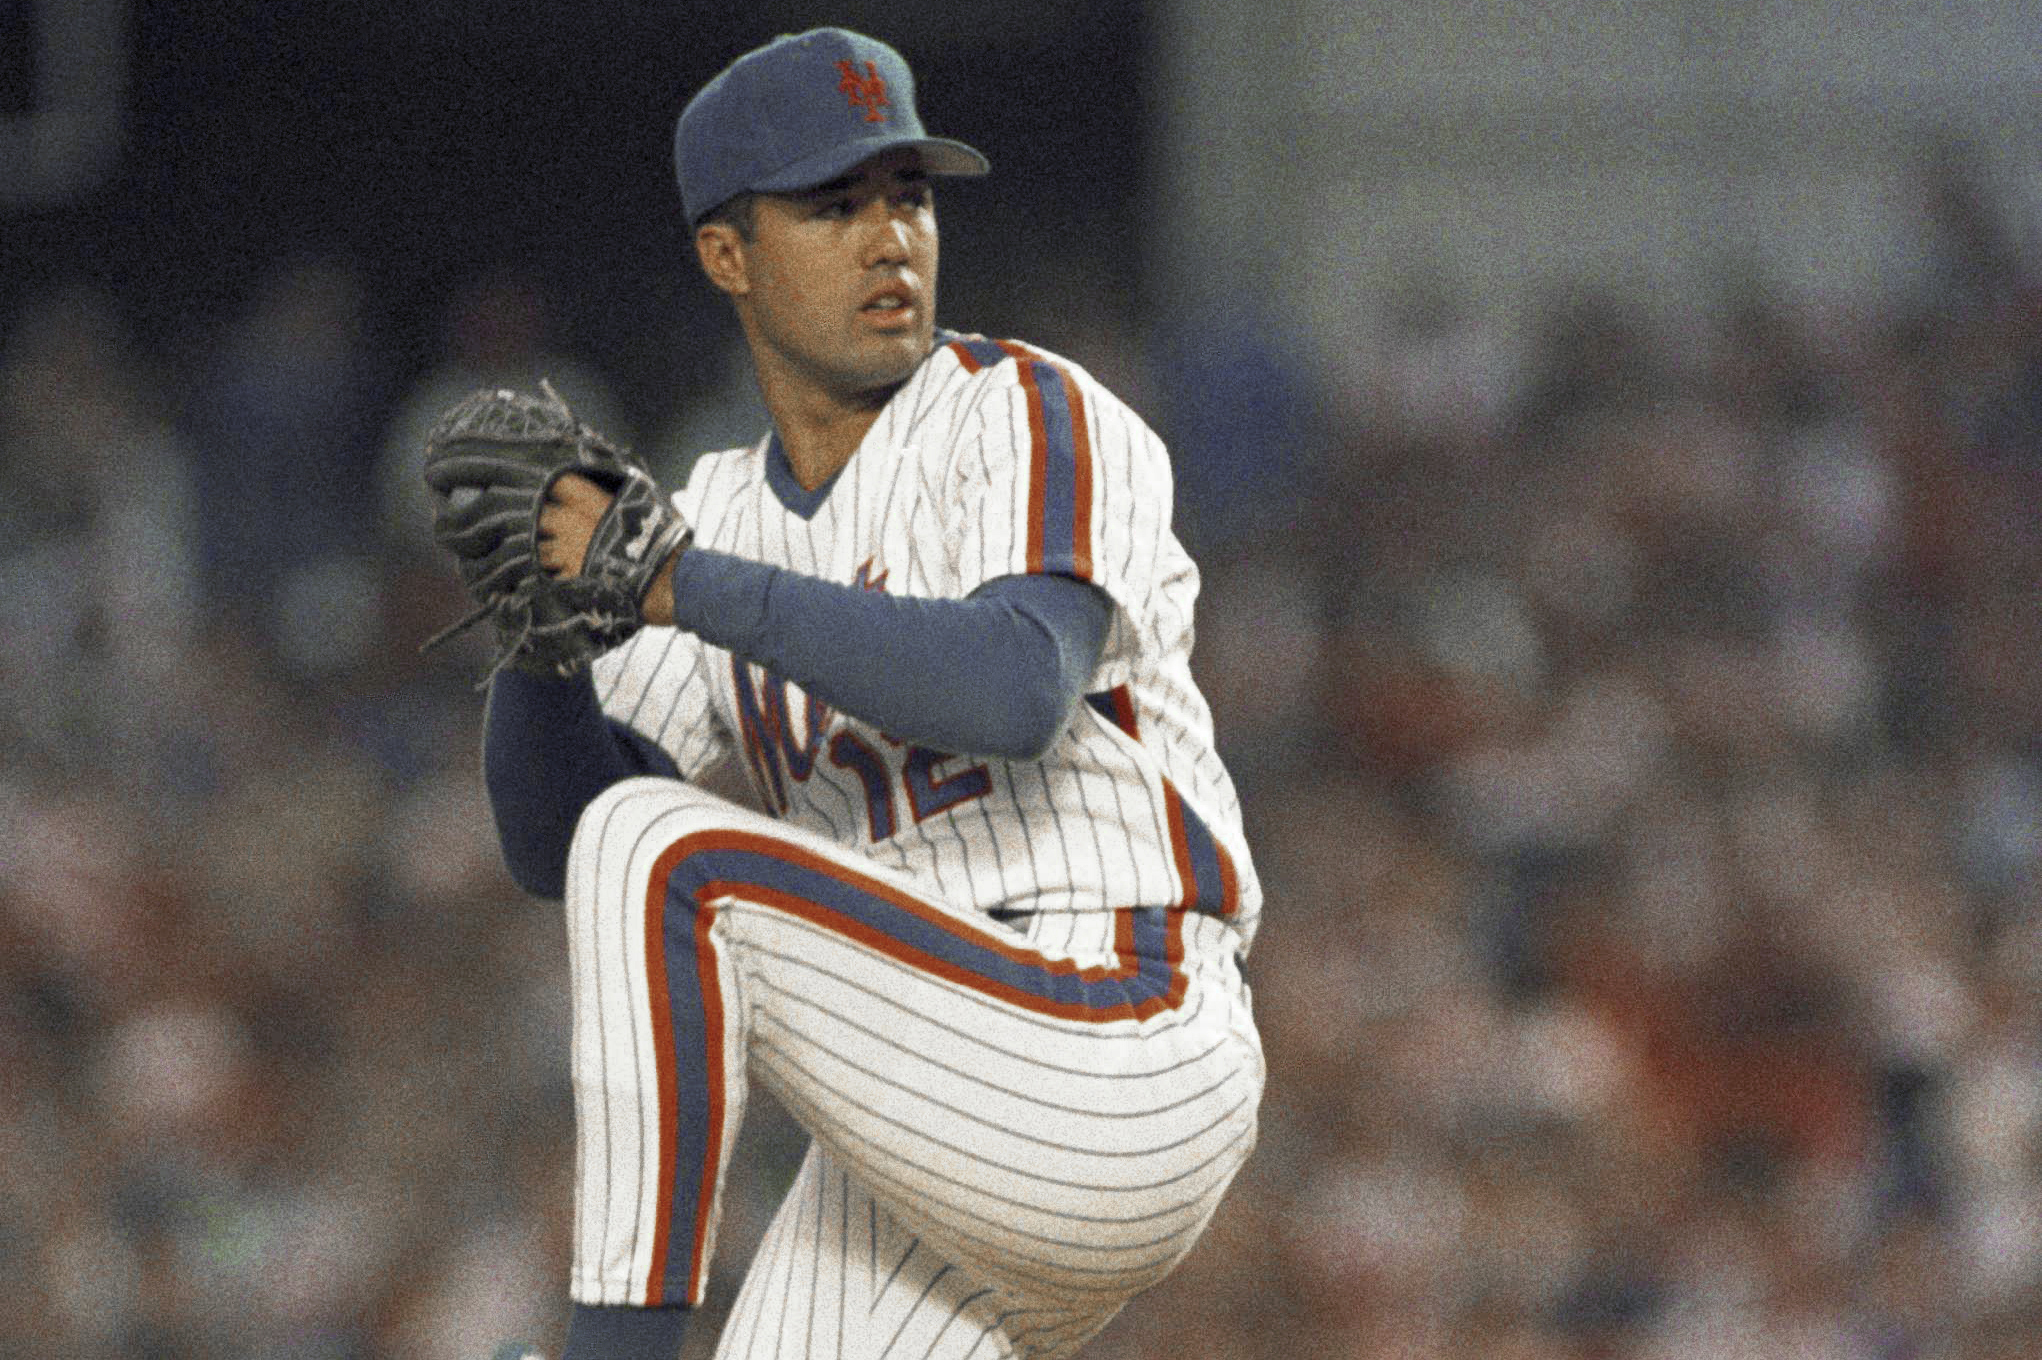 Ron Darling Comments on Drug, Alcohol Use in Dugout with 1986 New